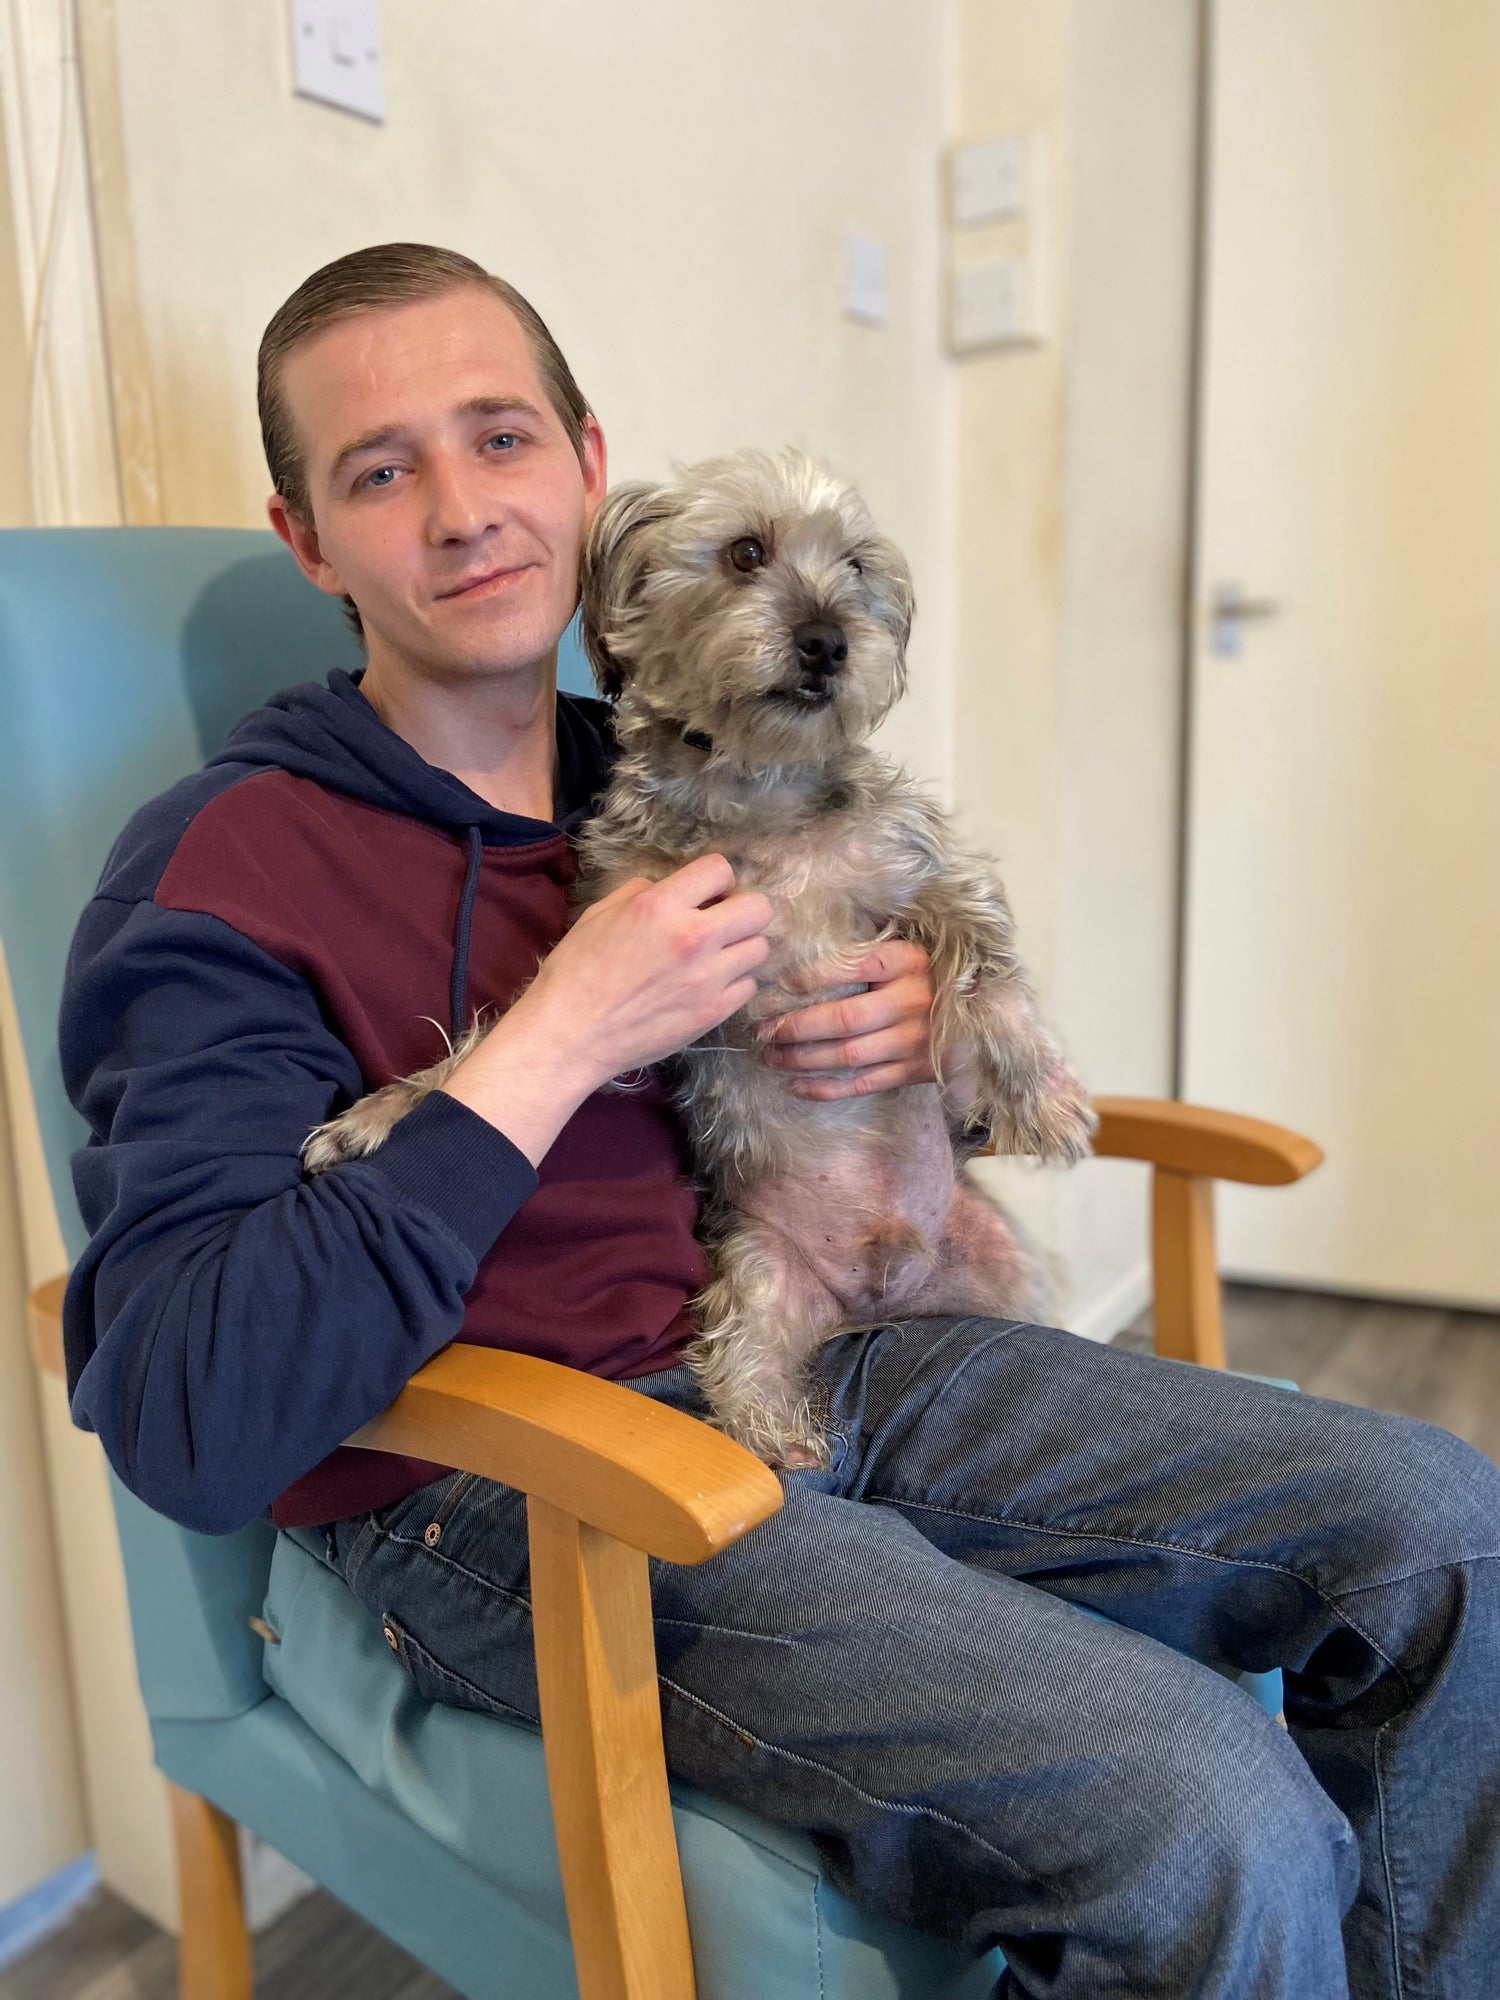 Man sat in a chair smiling holding a dog.